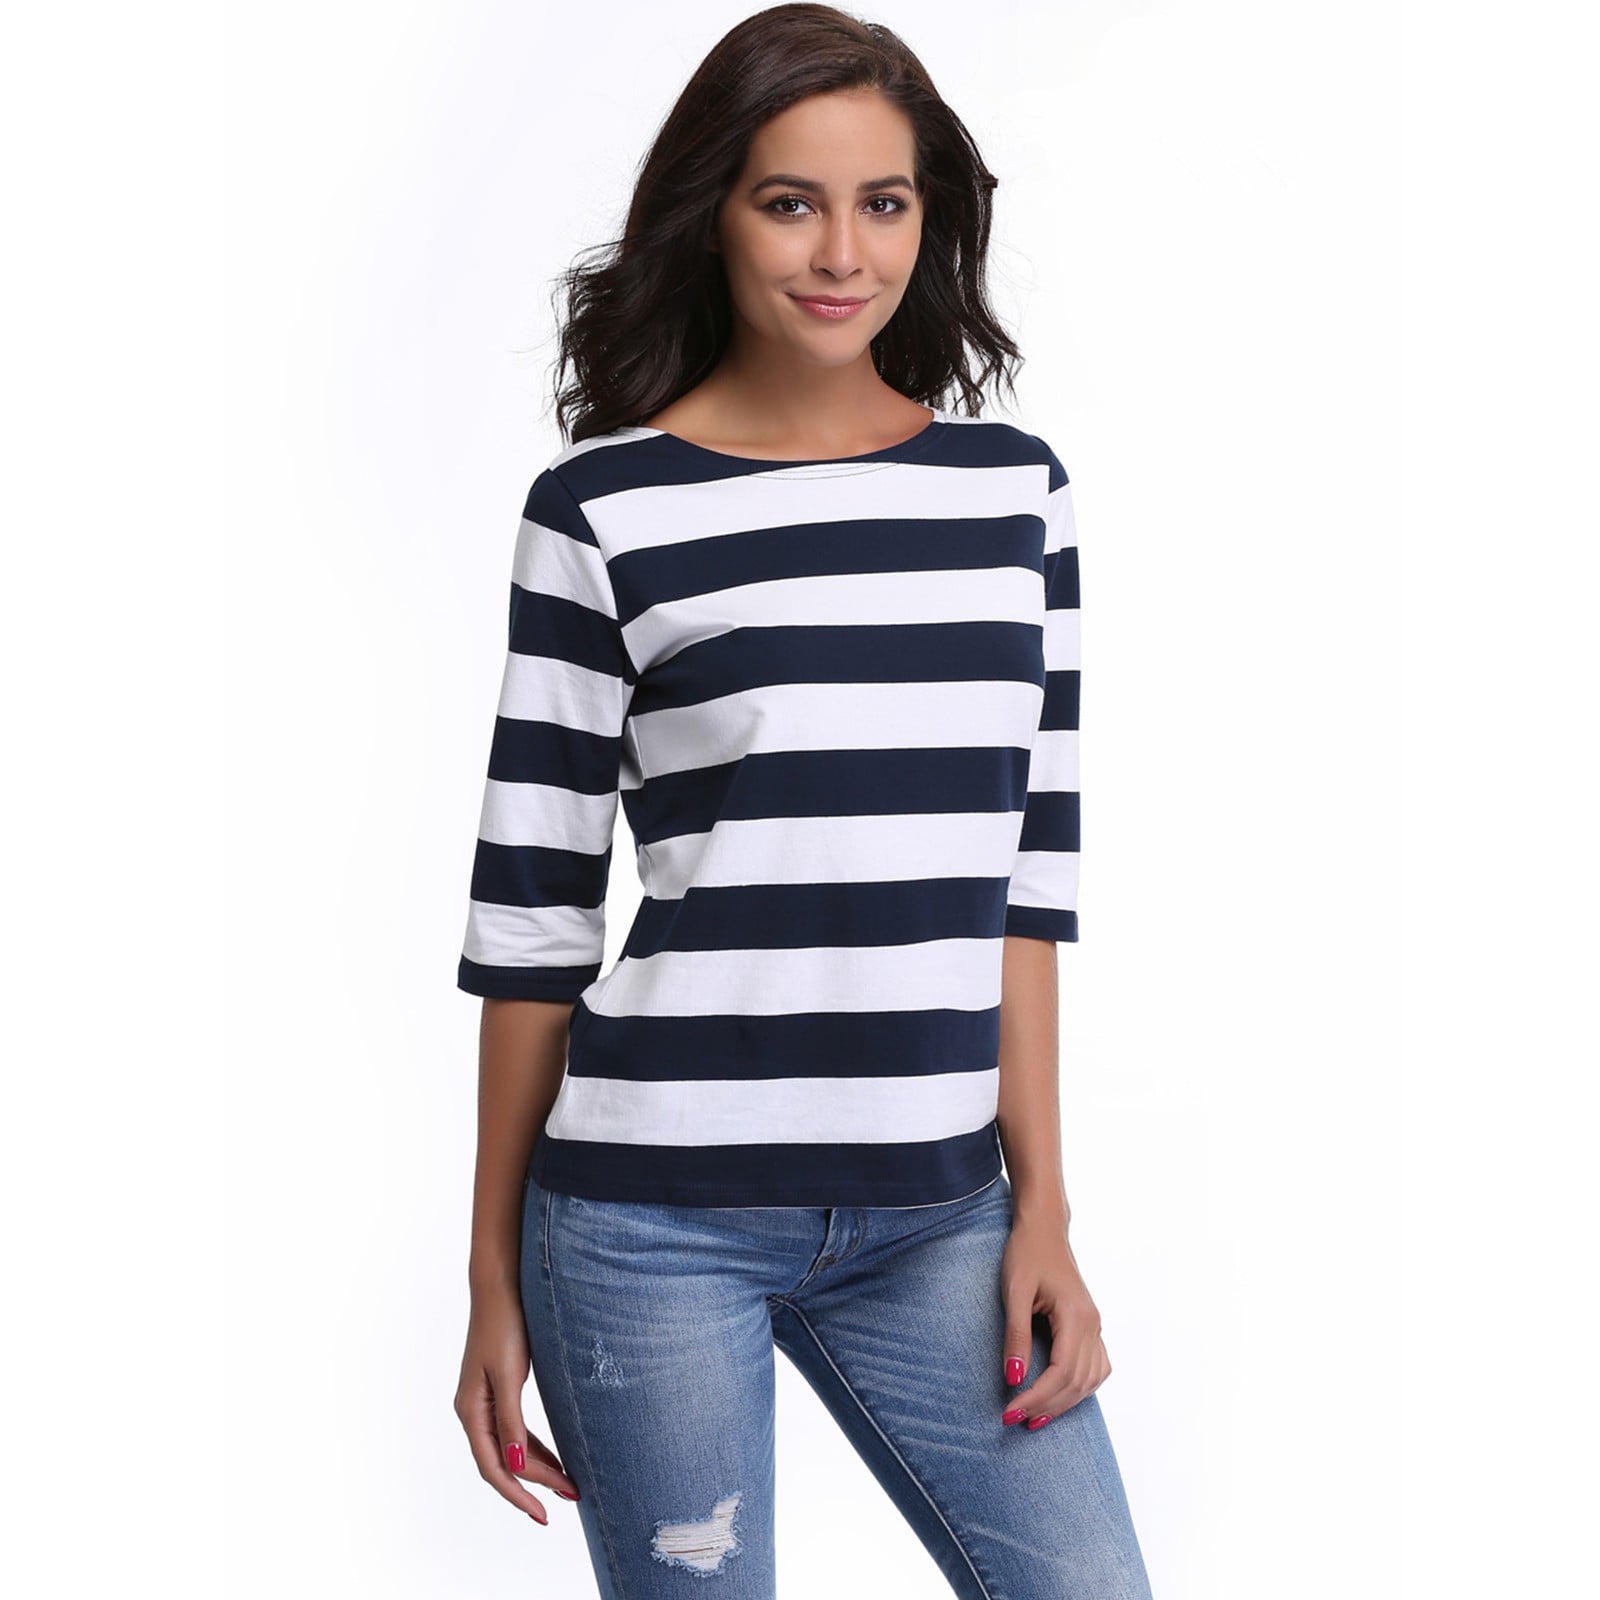 MISS MOLY Women's Summer Round Neck 3/4 Sleeves Striped Tee T-shirt ...